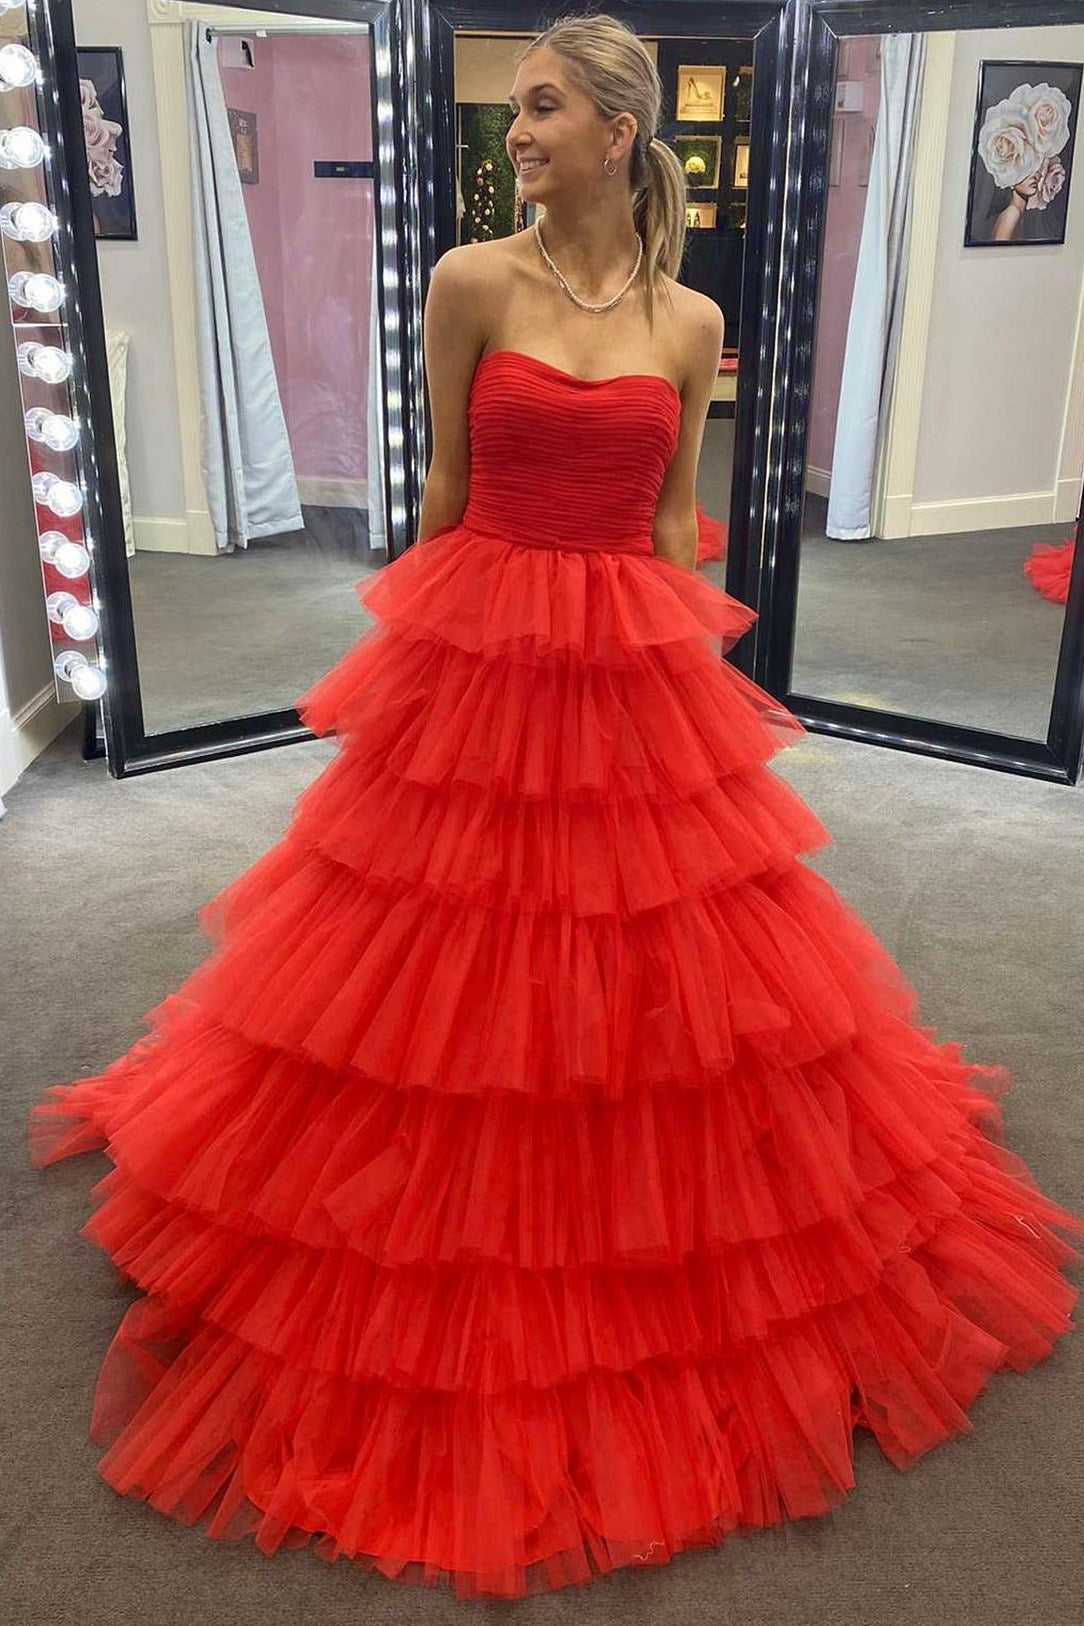 Daleyza |A-Line Strapless Tiered Tulle Prom Dress with Ruffles